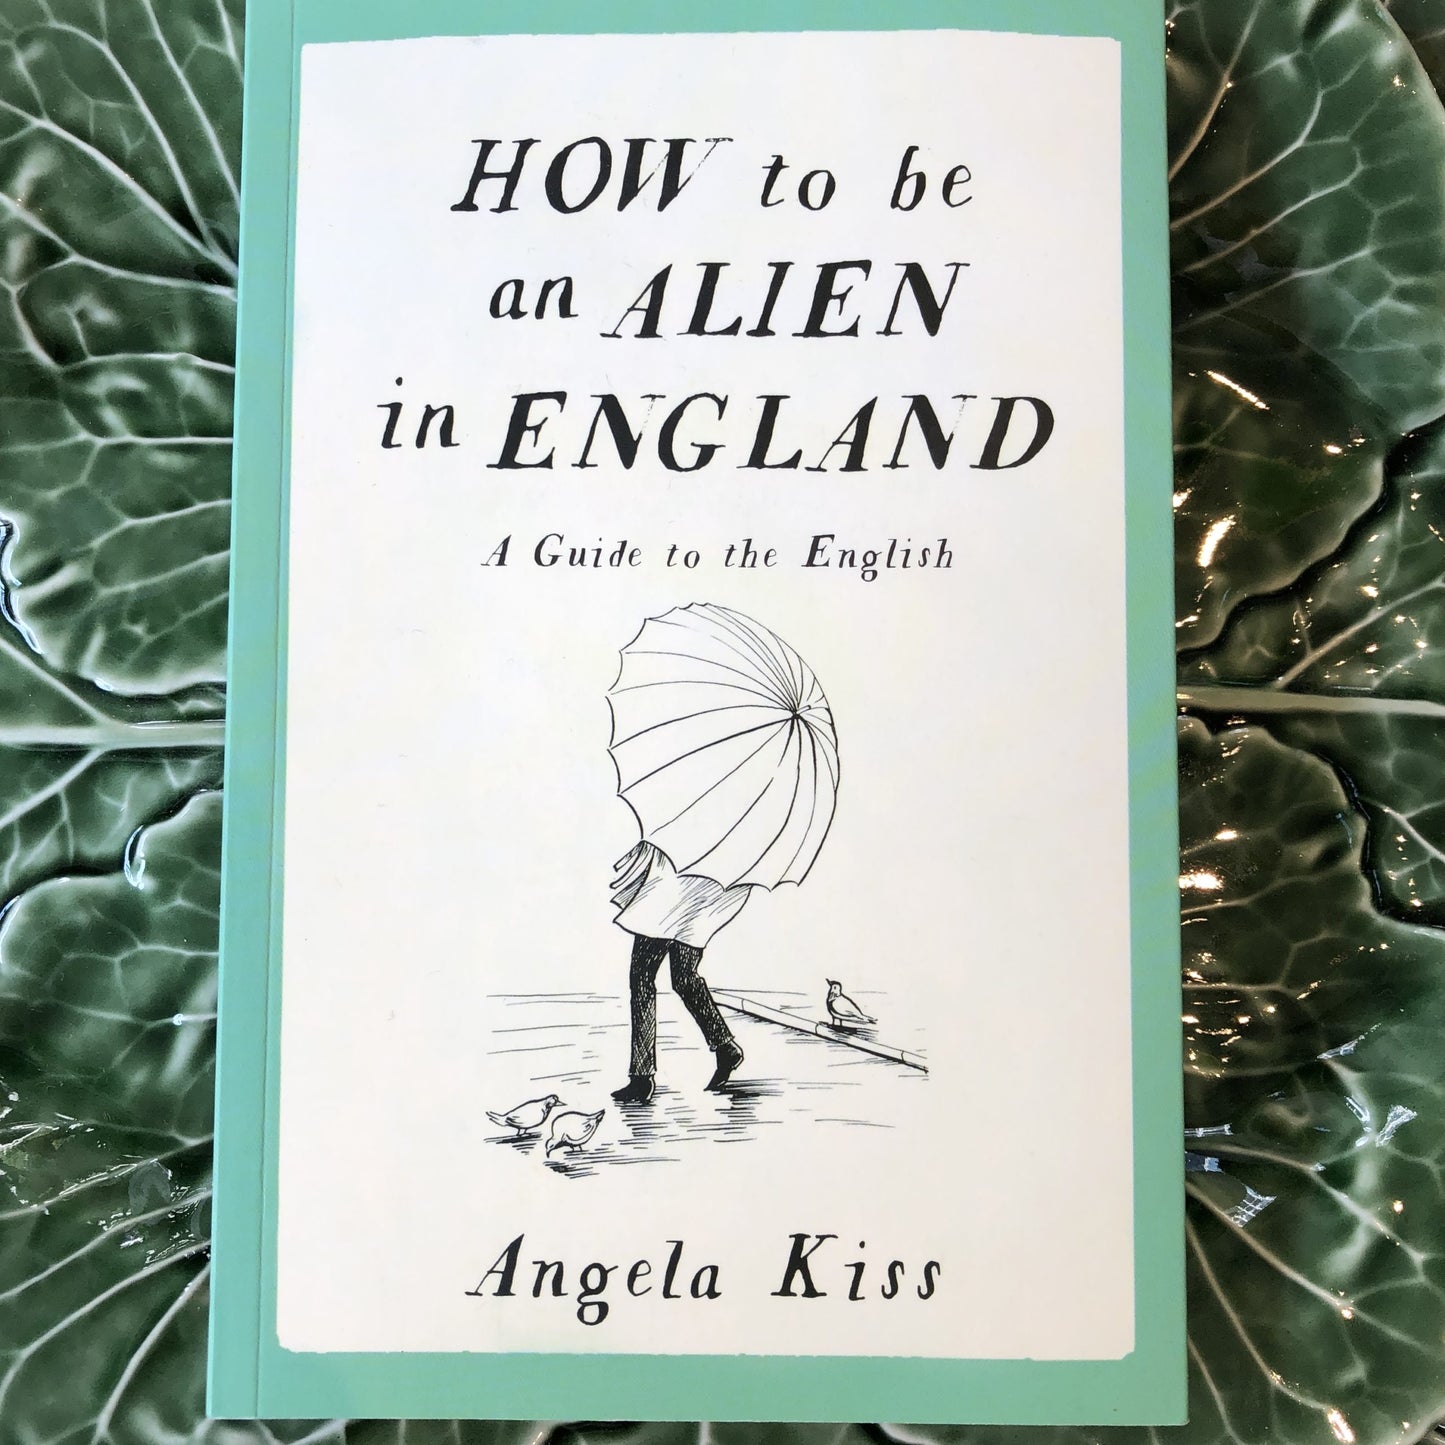 How to be an Alien in England